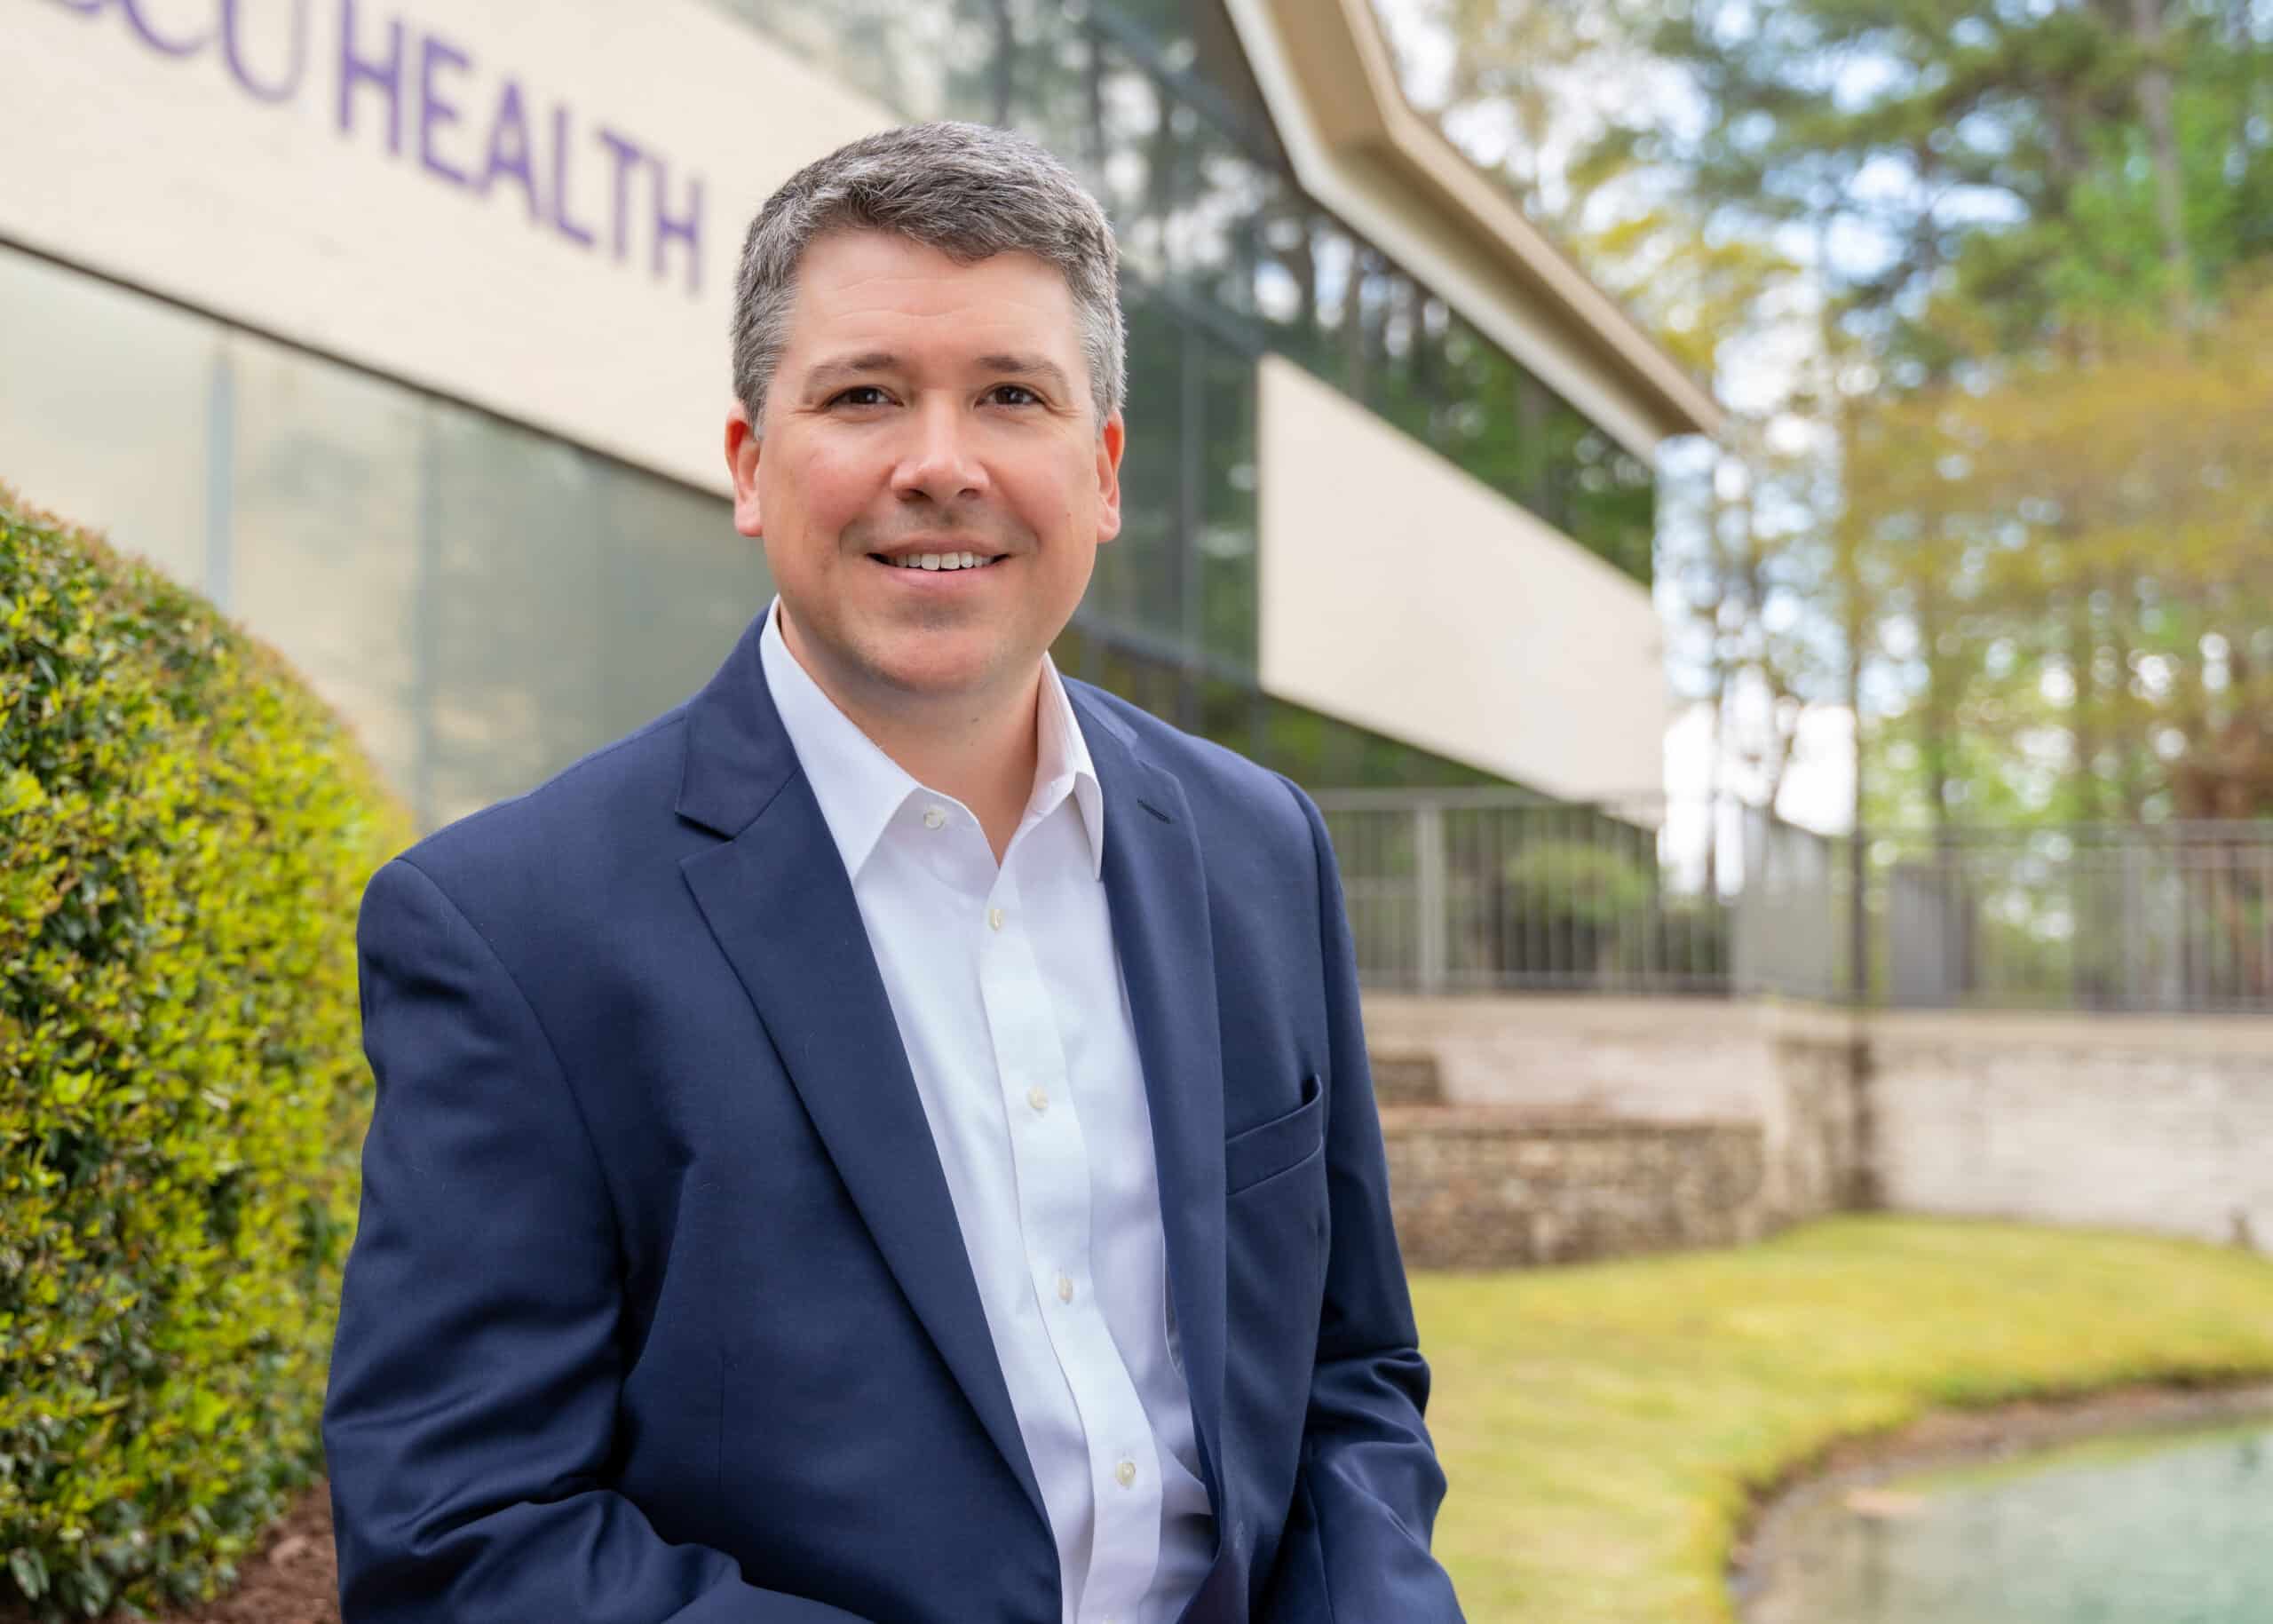 Jay Briley, ECU Health Community Hospitals president, stands outside of the ECU Health administration building and smiles into a camera.